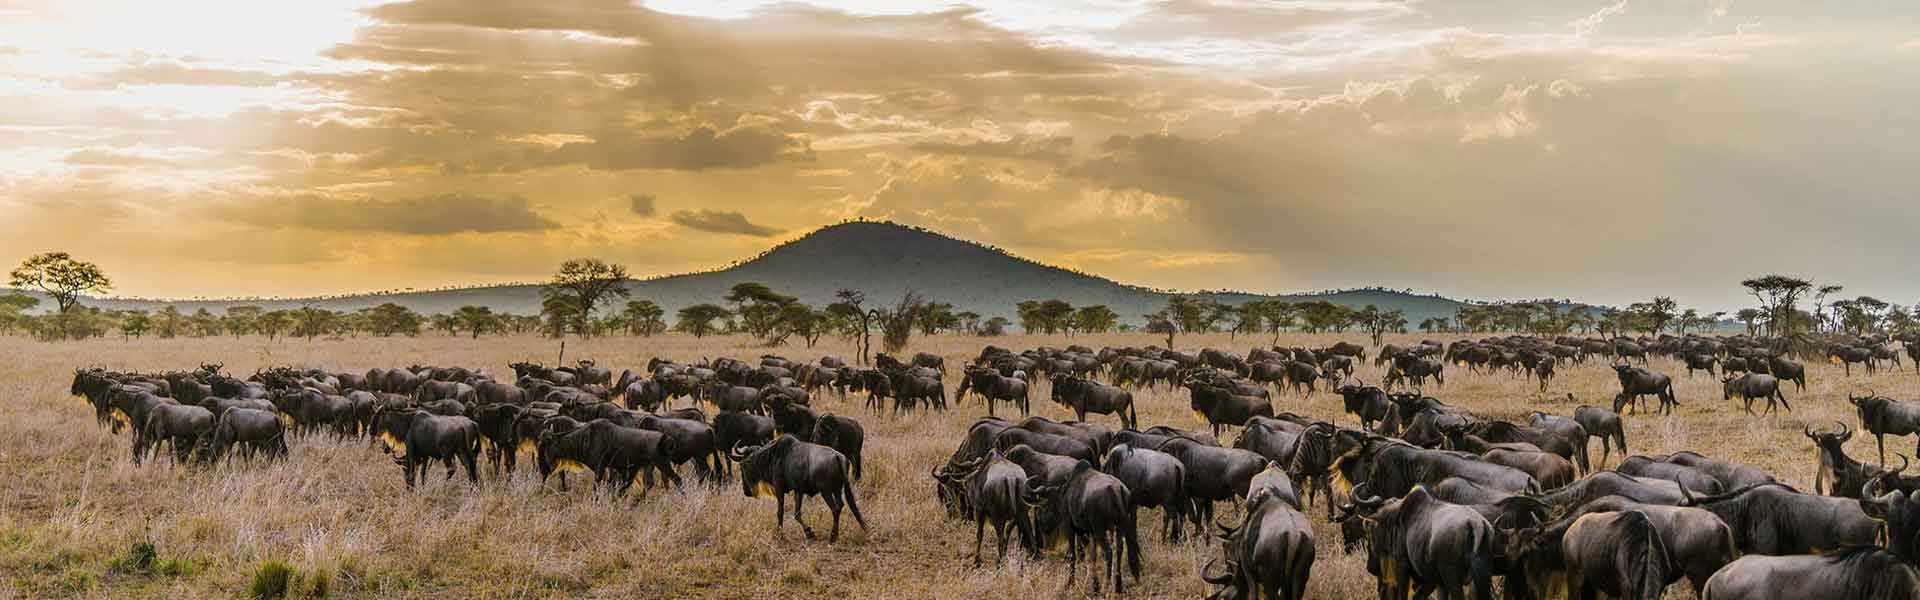 Serengeti National Park: Wildlife Wonders, Sweeping Plains, And The Legendary Great Migration Await In This Iconic African Treasure.